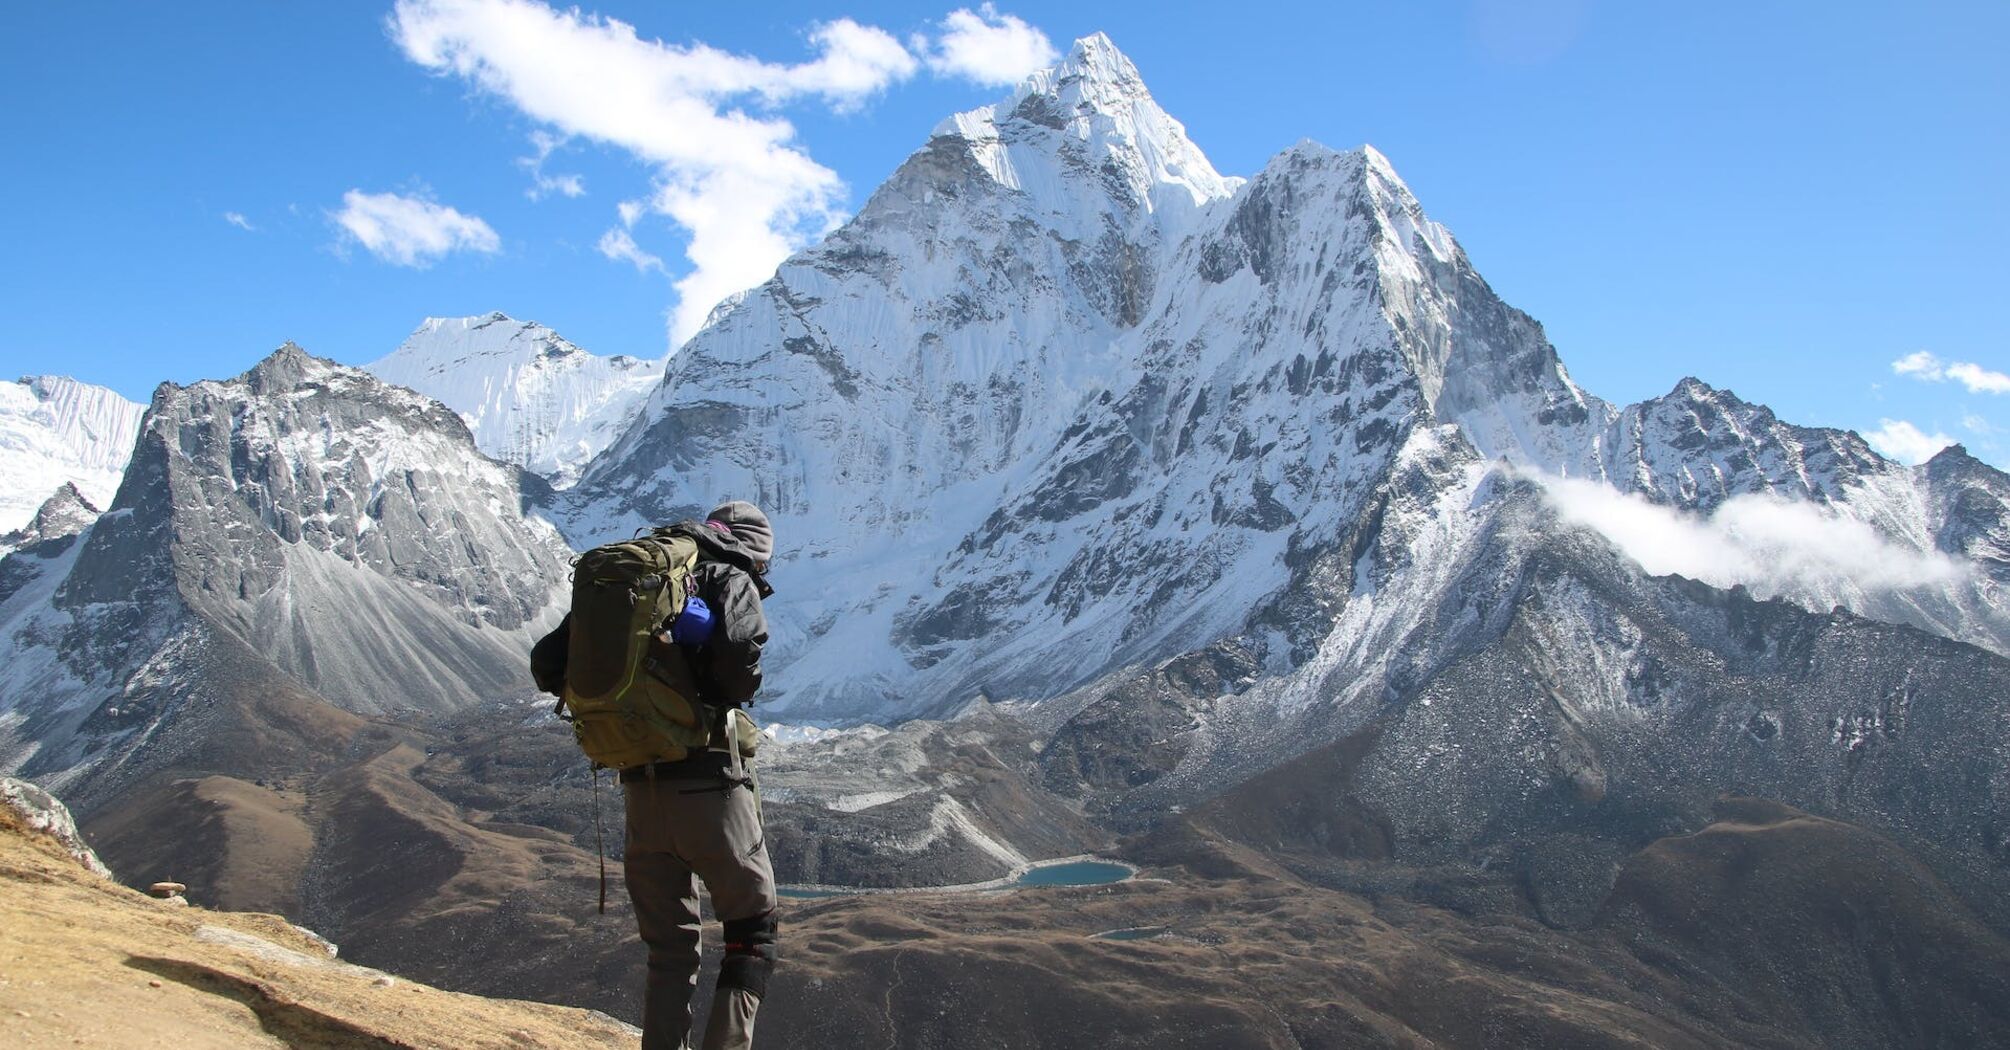 Toilet Issue: The Nepalese authorities are implementing new rules for climbers on Everest